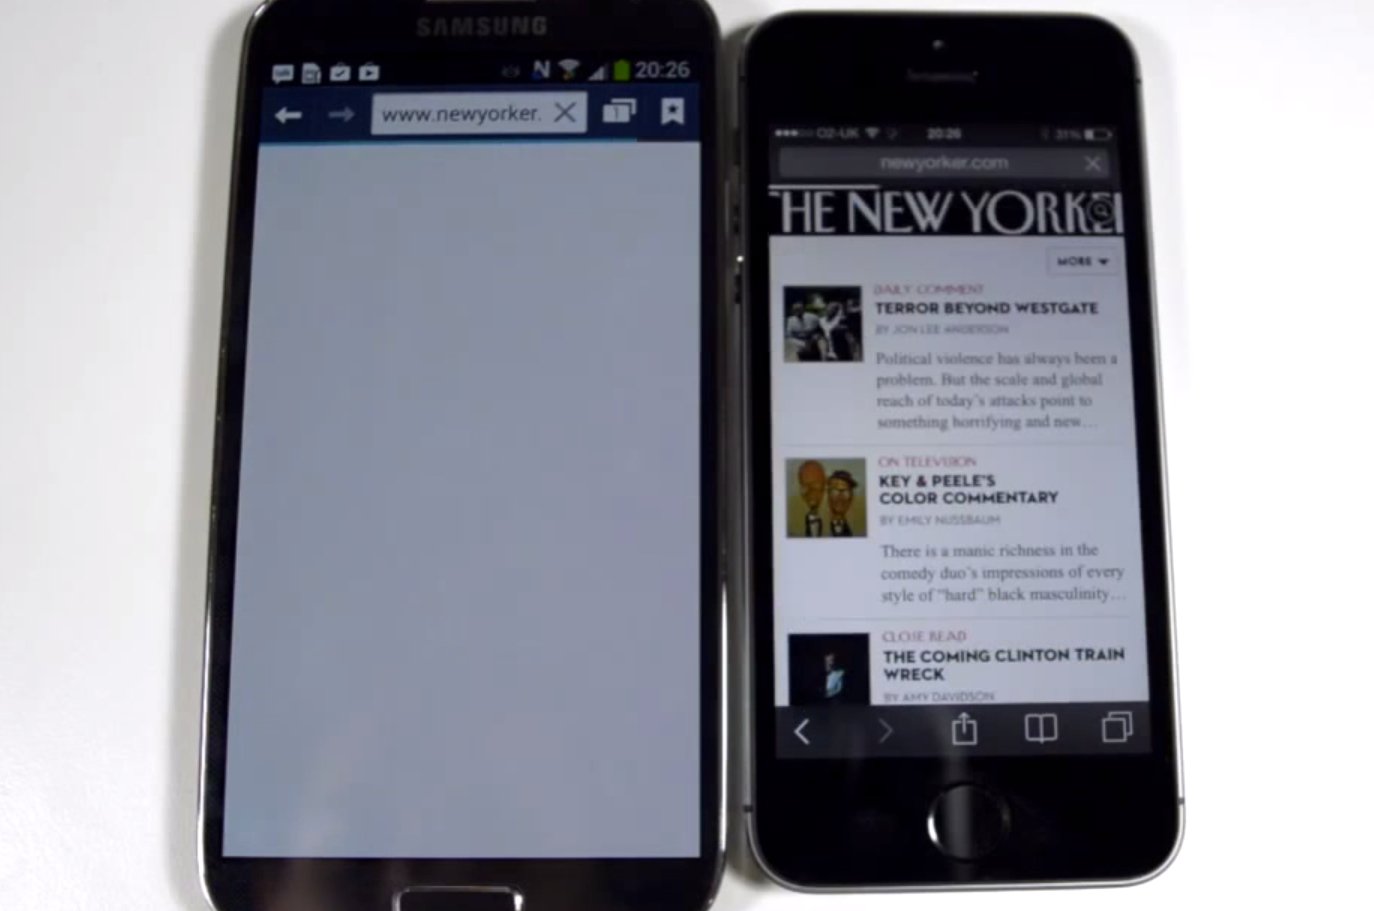 Browser Speed-Test iPhone 5s vs. Samsung Galaxy S4 2